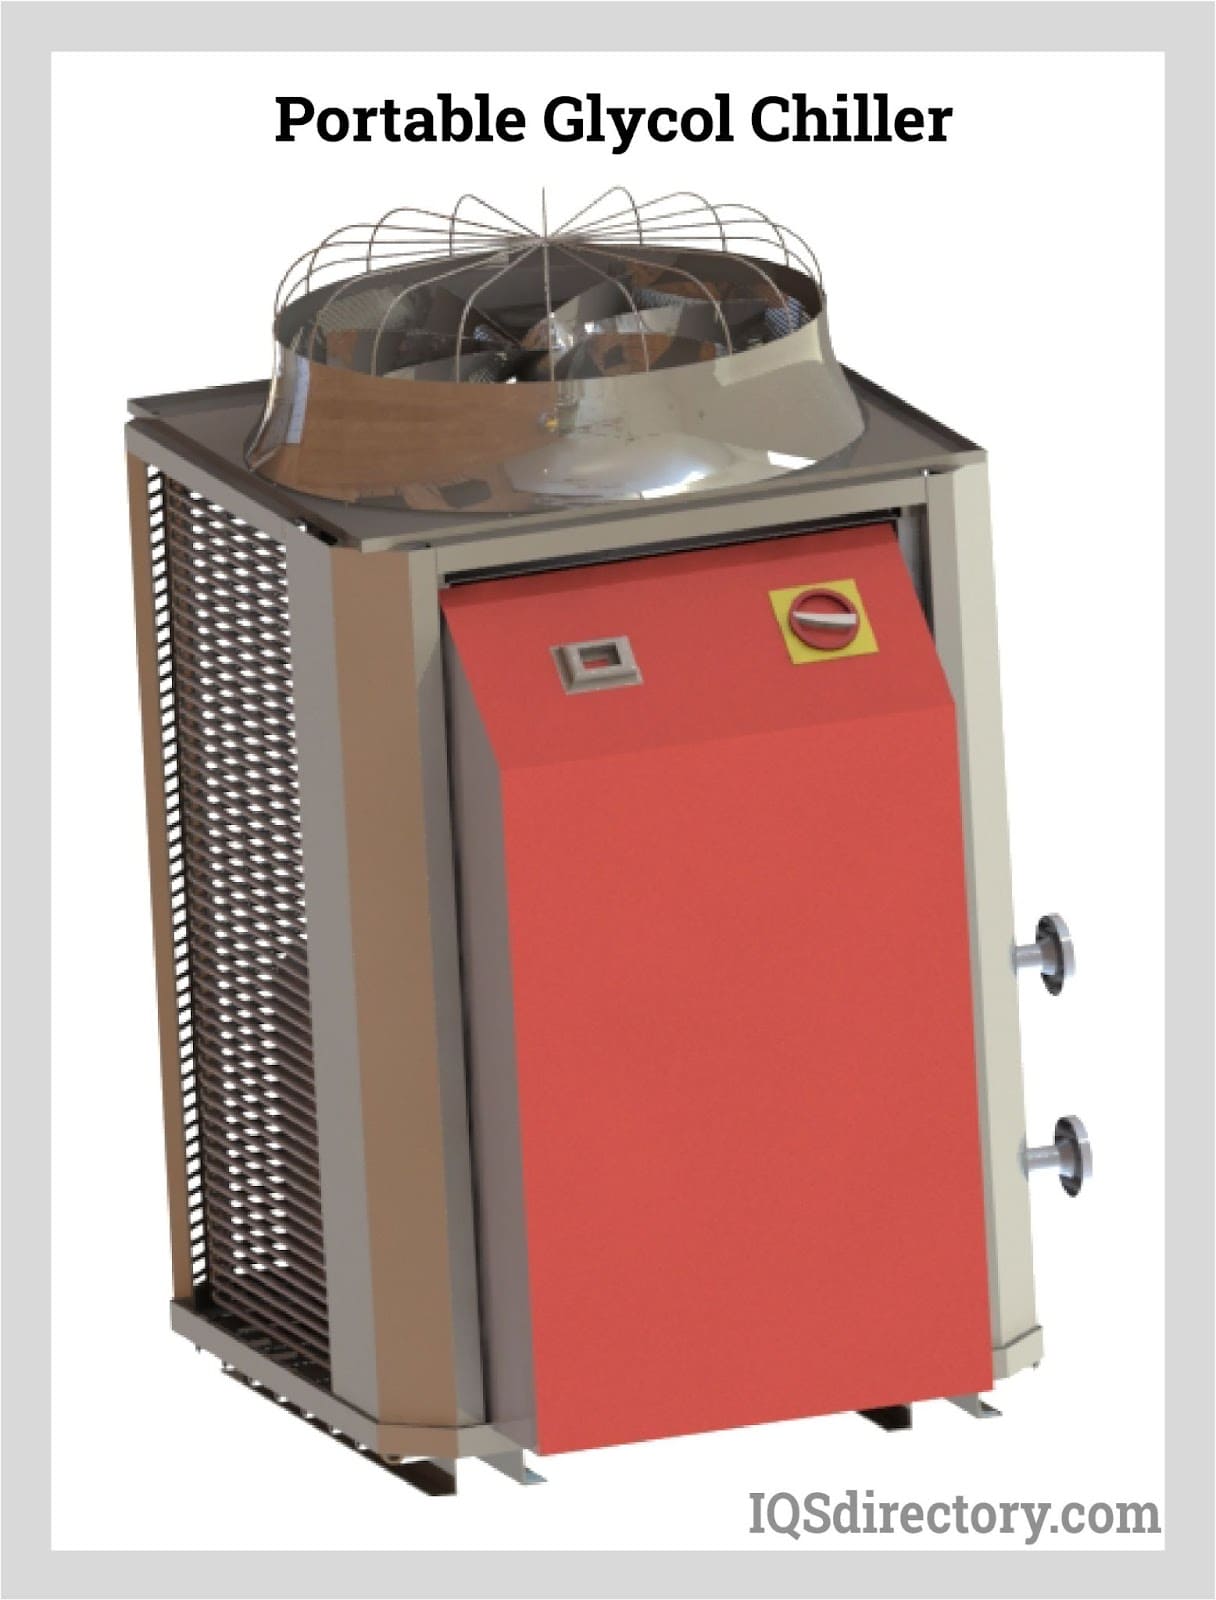 Portable Glycol Chiller